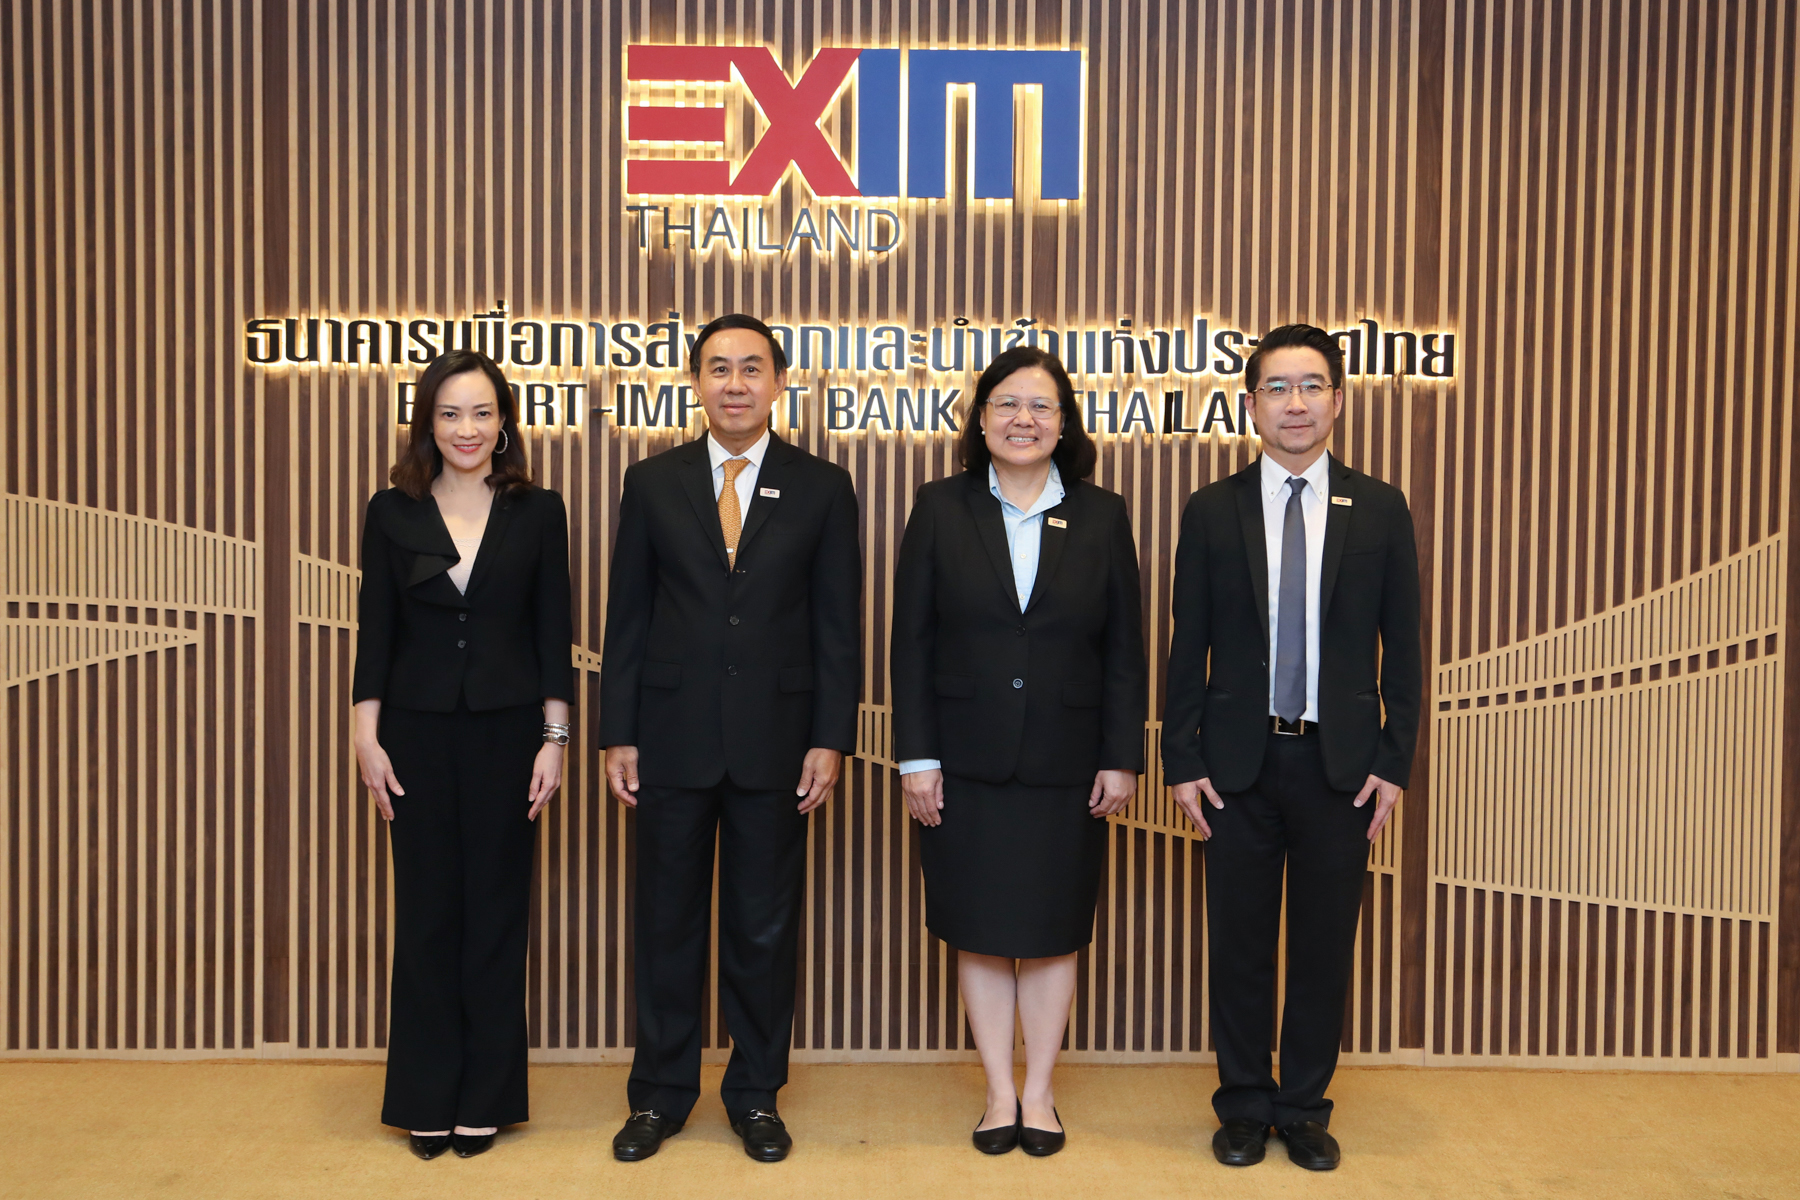 EXIM Thailand Chaired Asia-Pacific Regional Co-operation Group Meeting